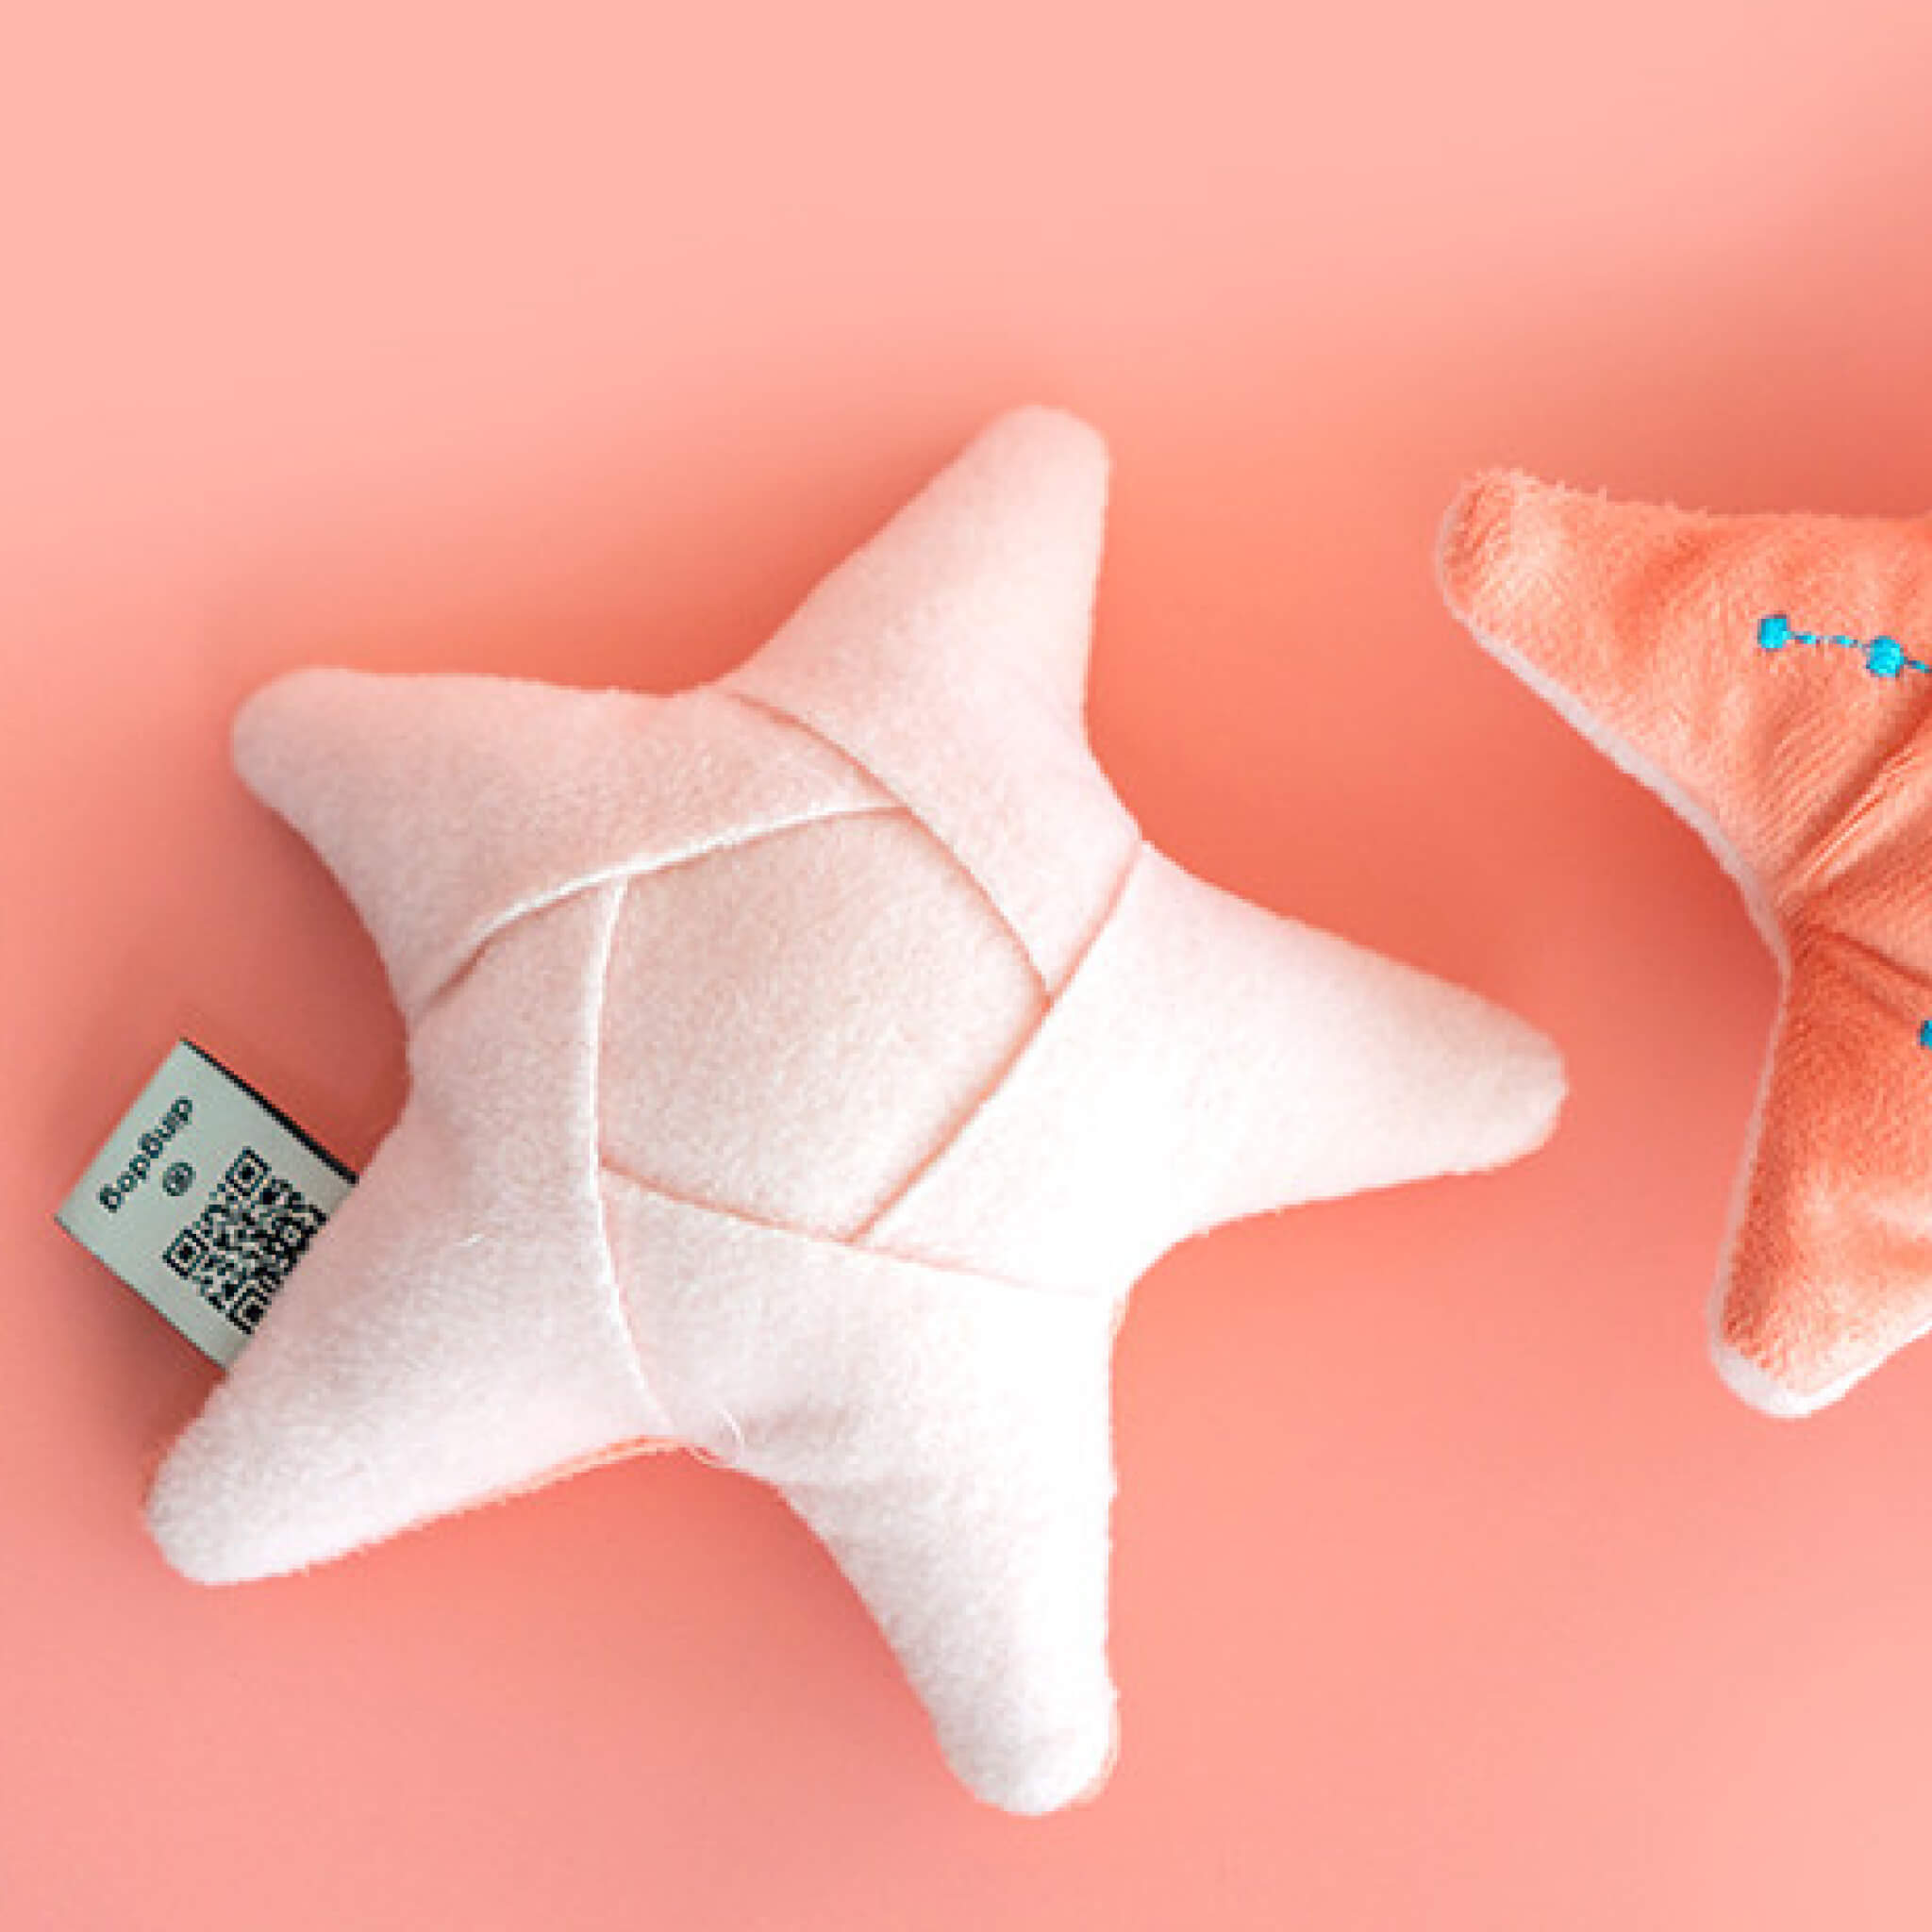 Bottom of starfish nosework toy with pockets for food and snacks.